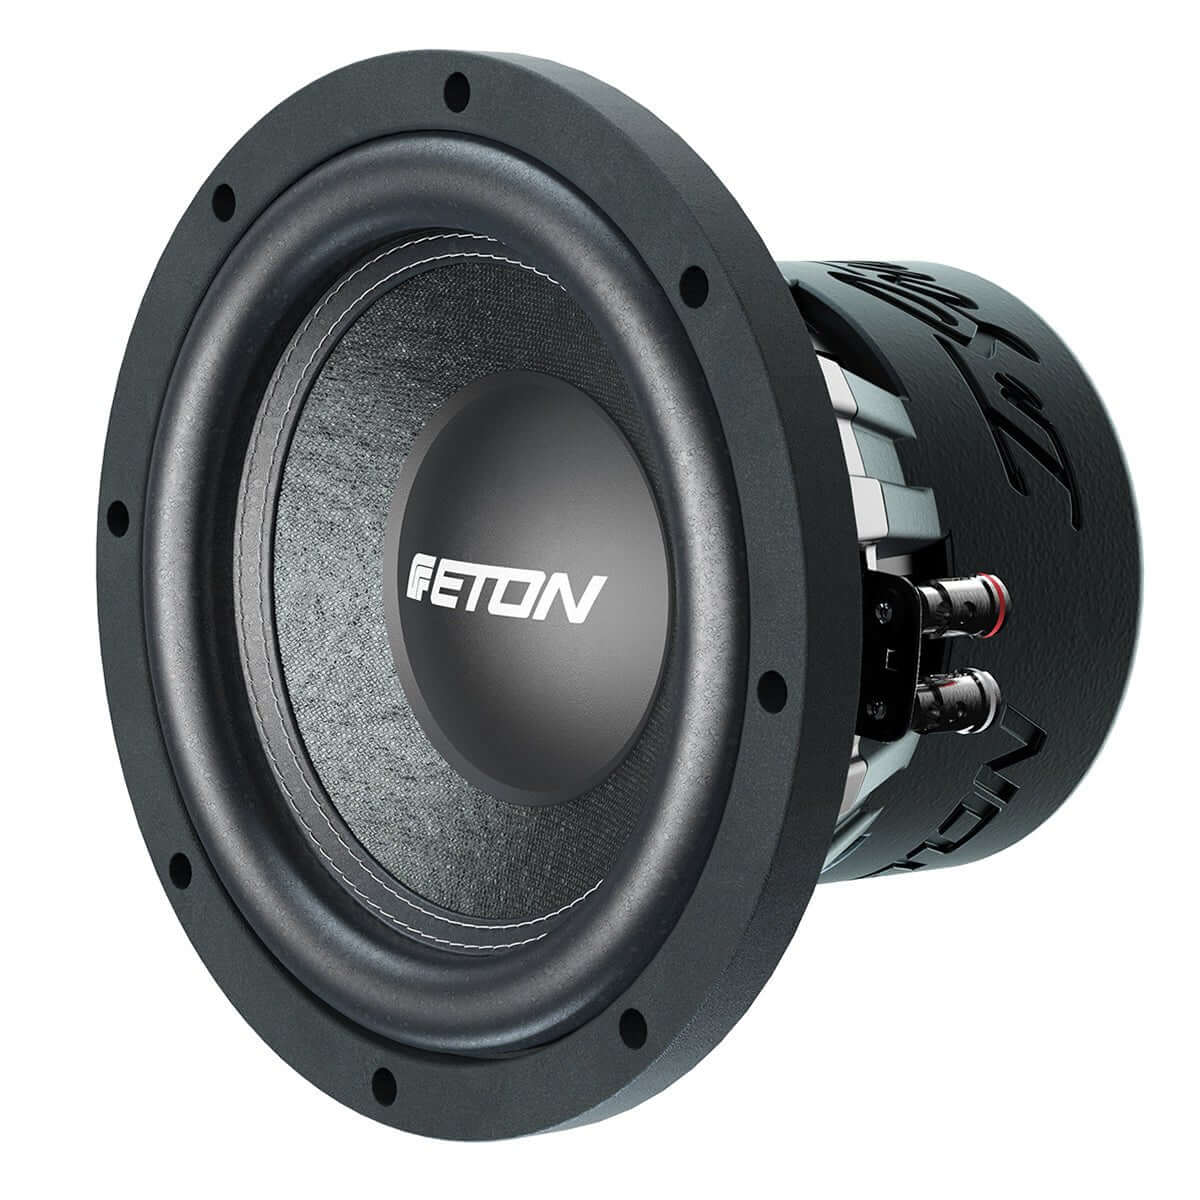 8-Inch Subwoofers  High-Quality Audio Solutions